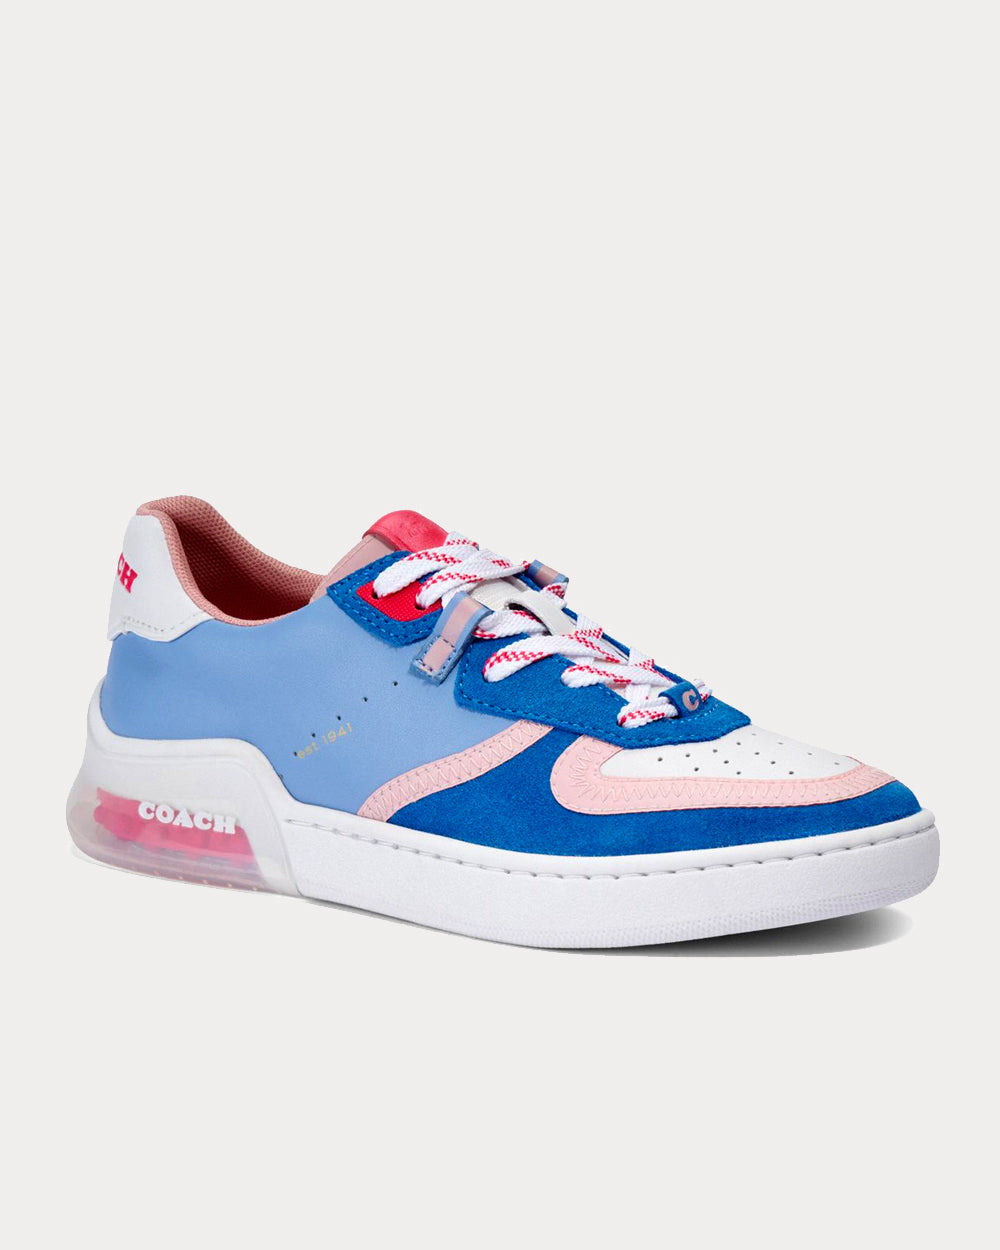 Coach - Citysole Court Periwinkle Low Top Sneakers